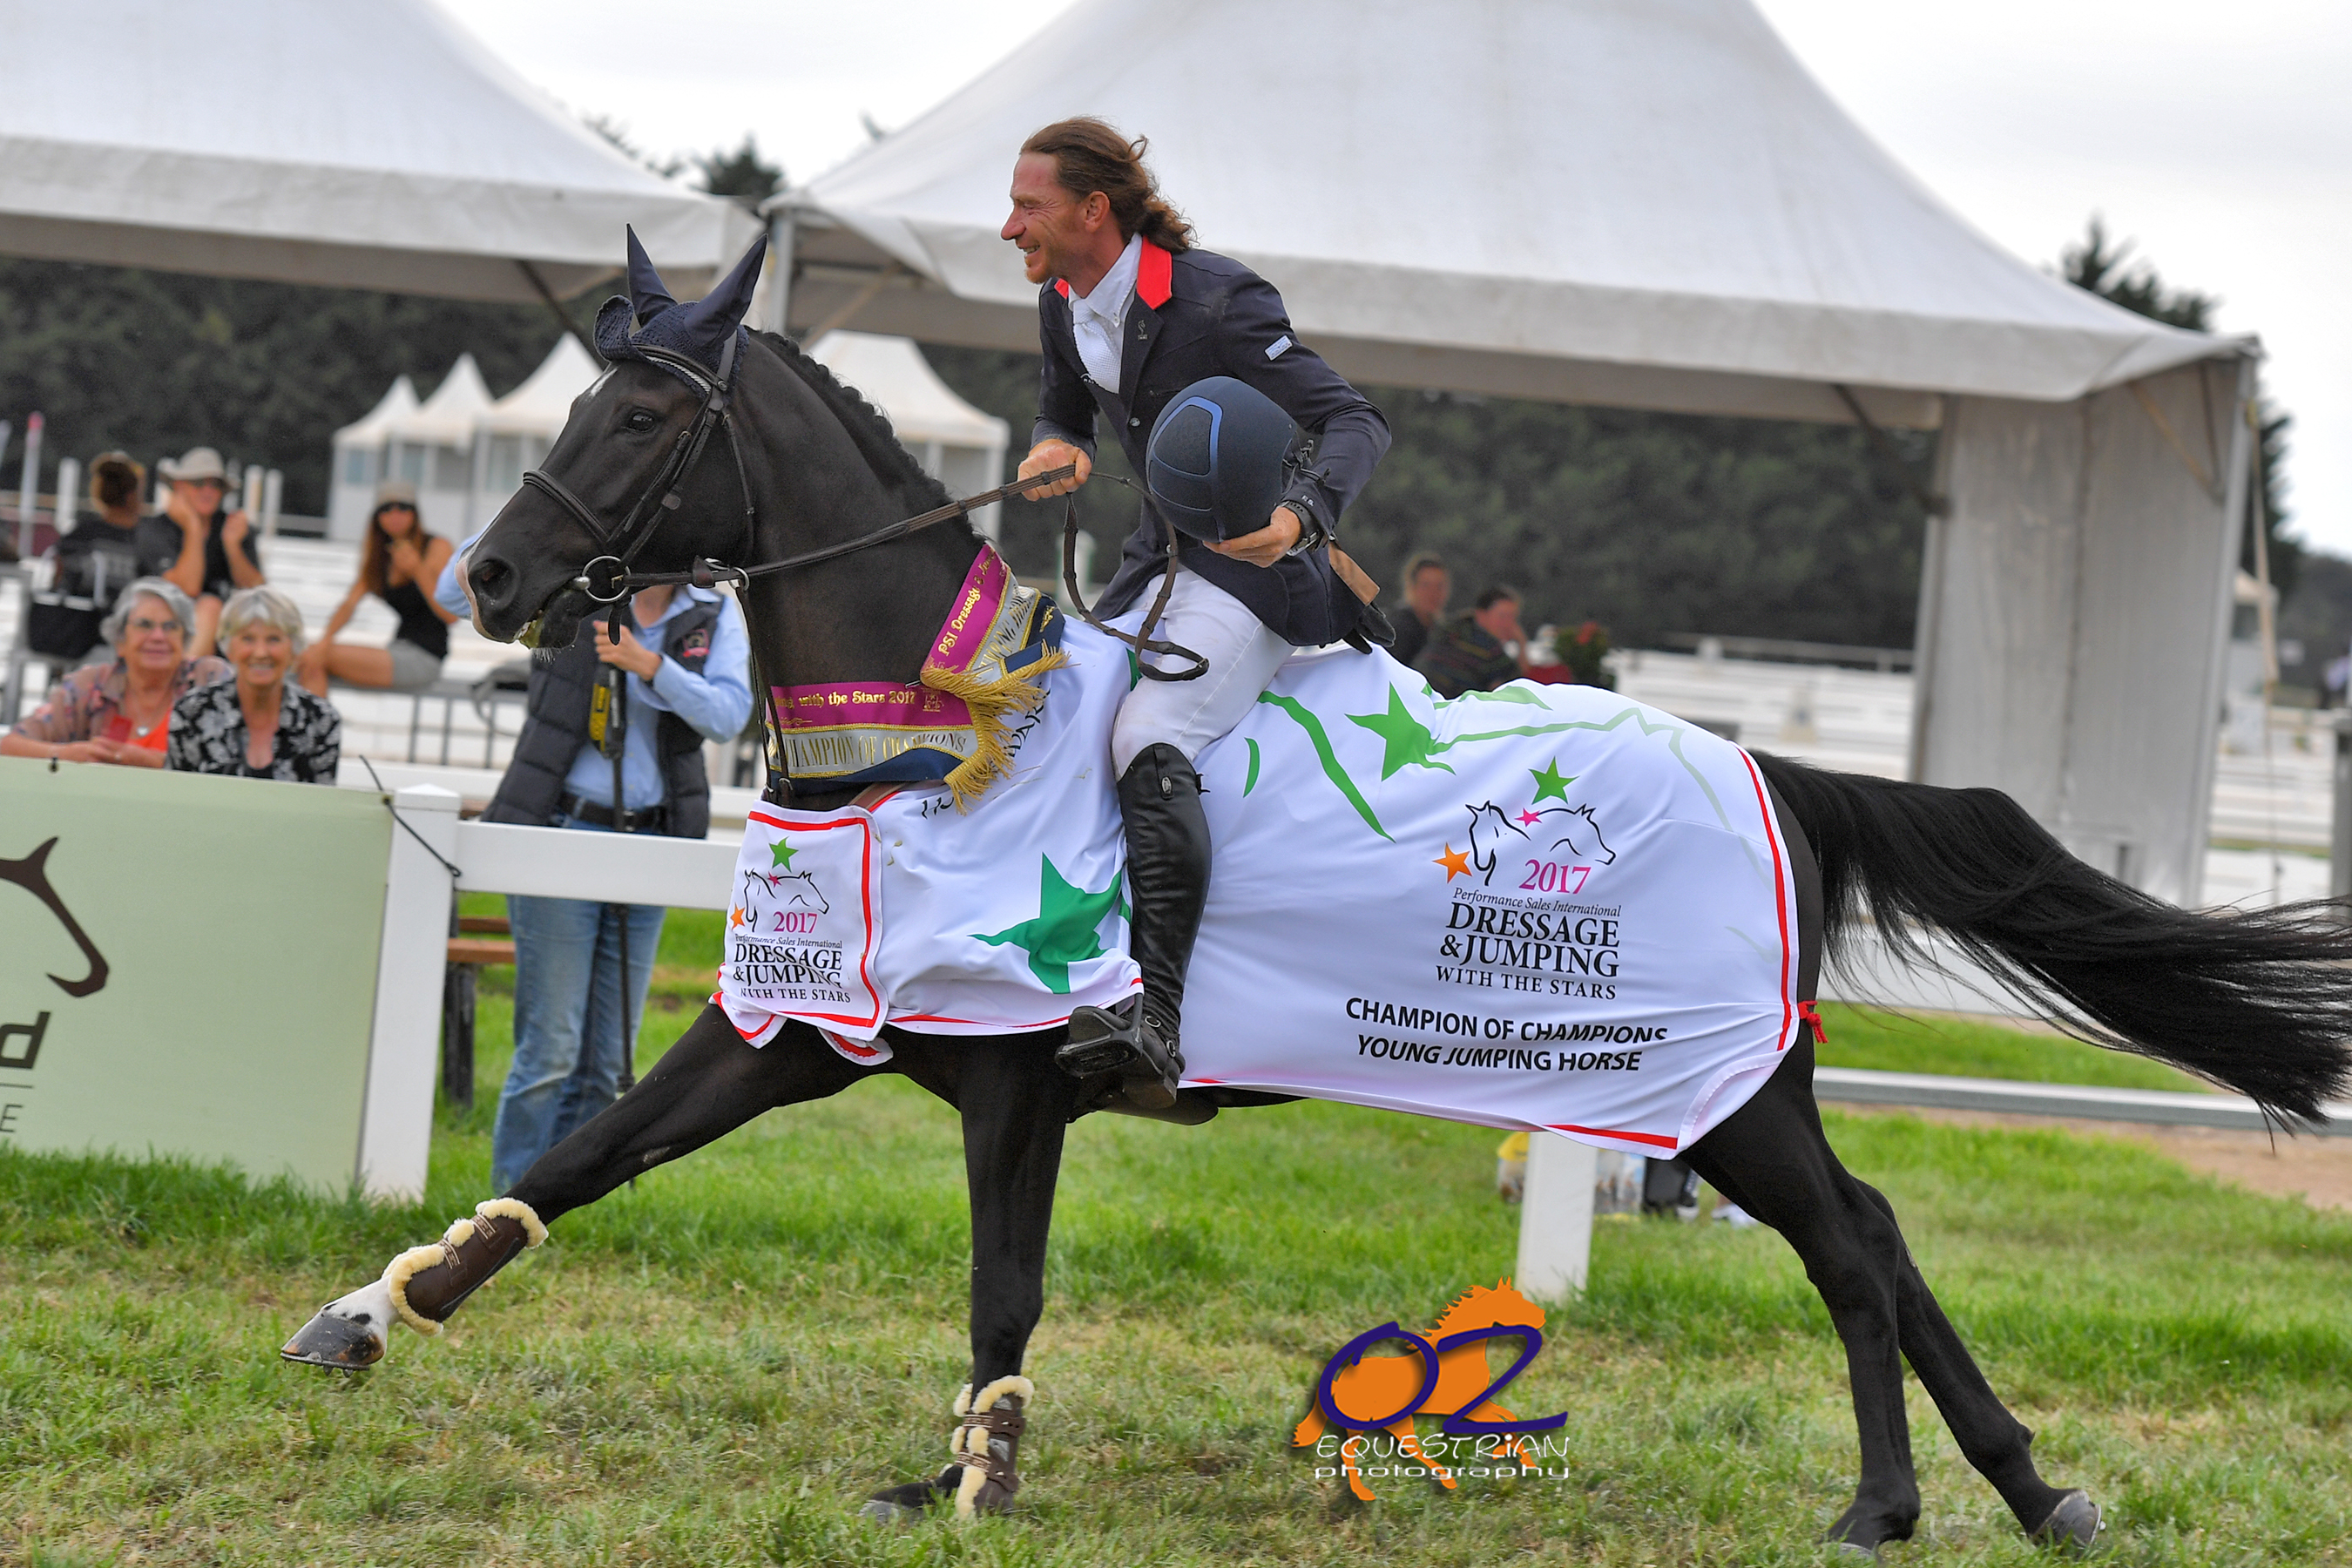 Dressage and Jumping with the Stars wrapup Equestrian Australia